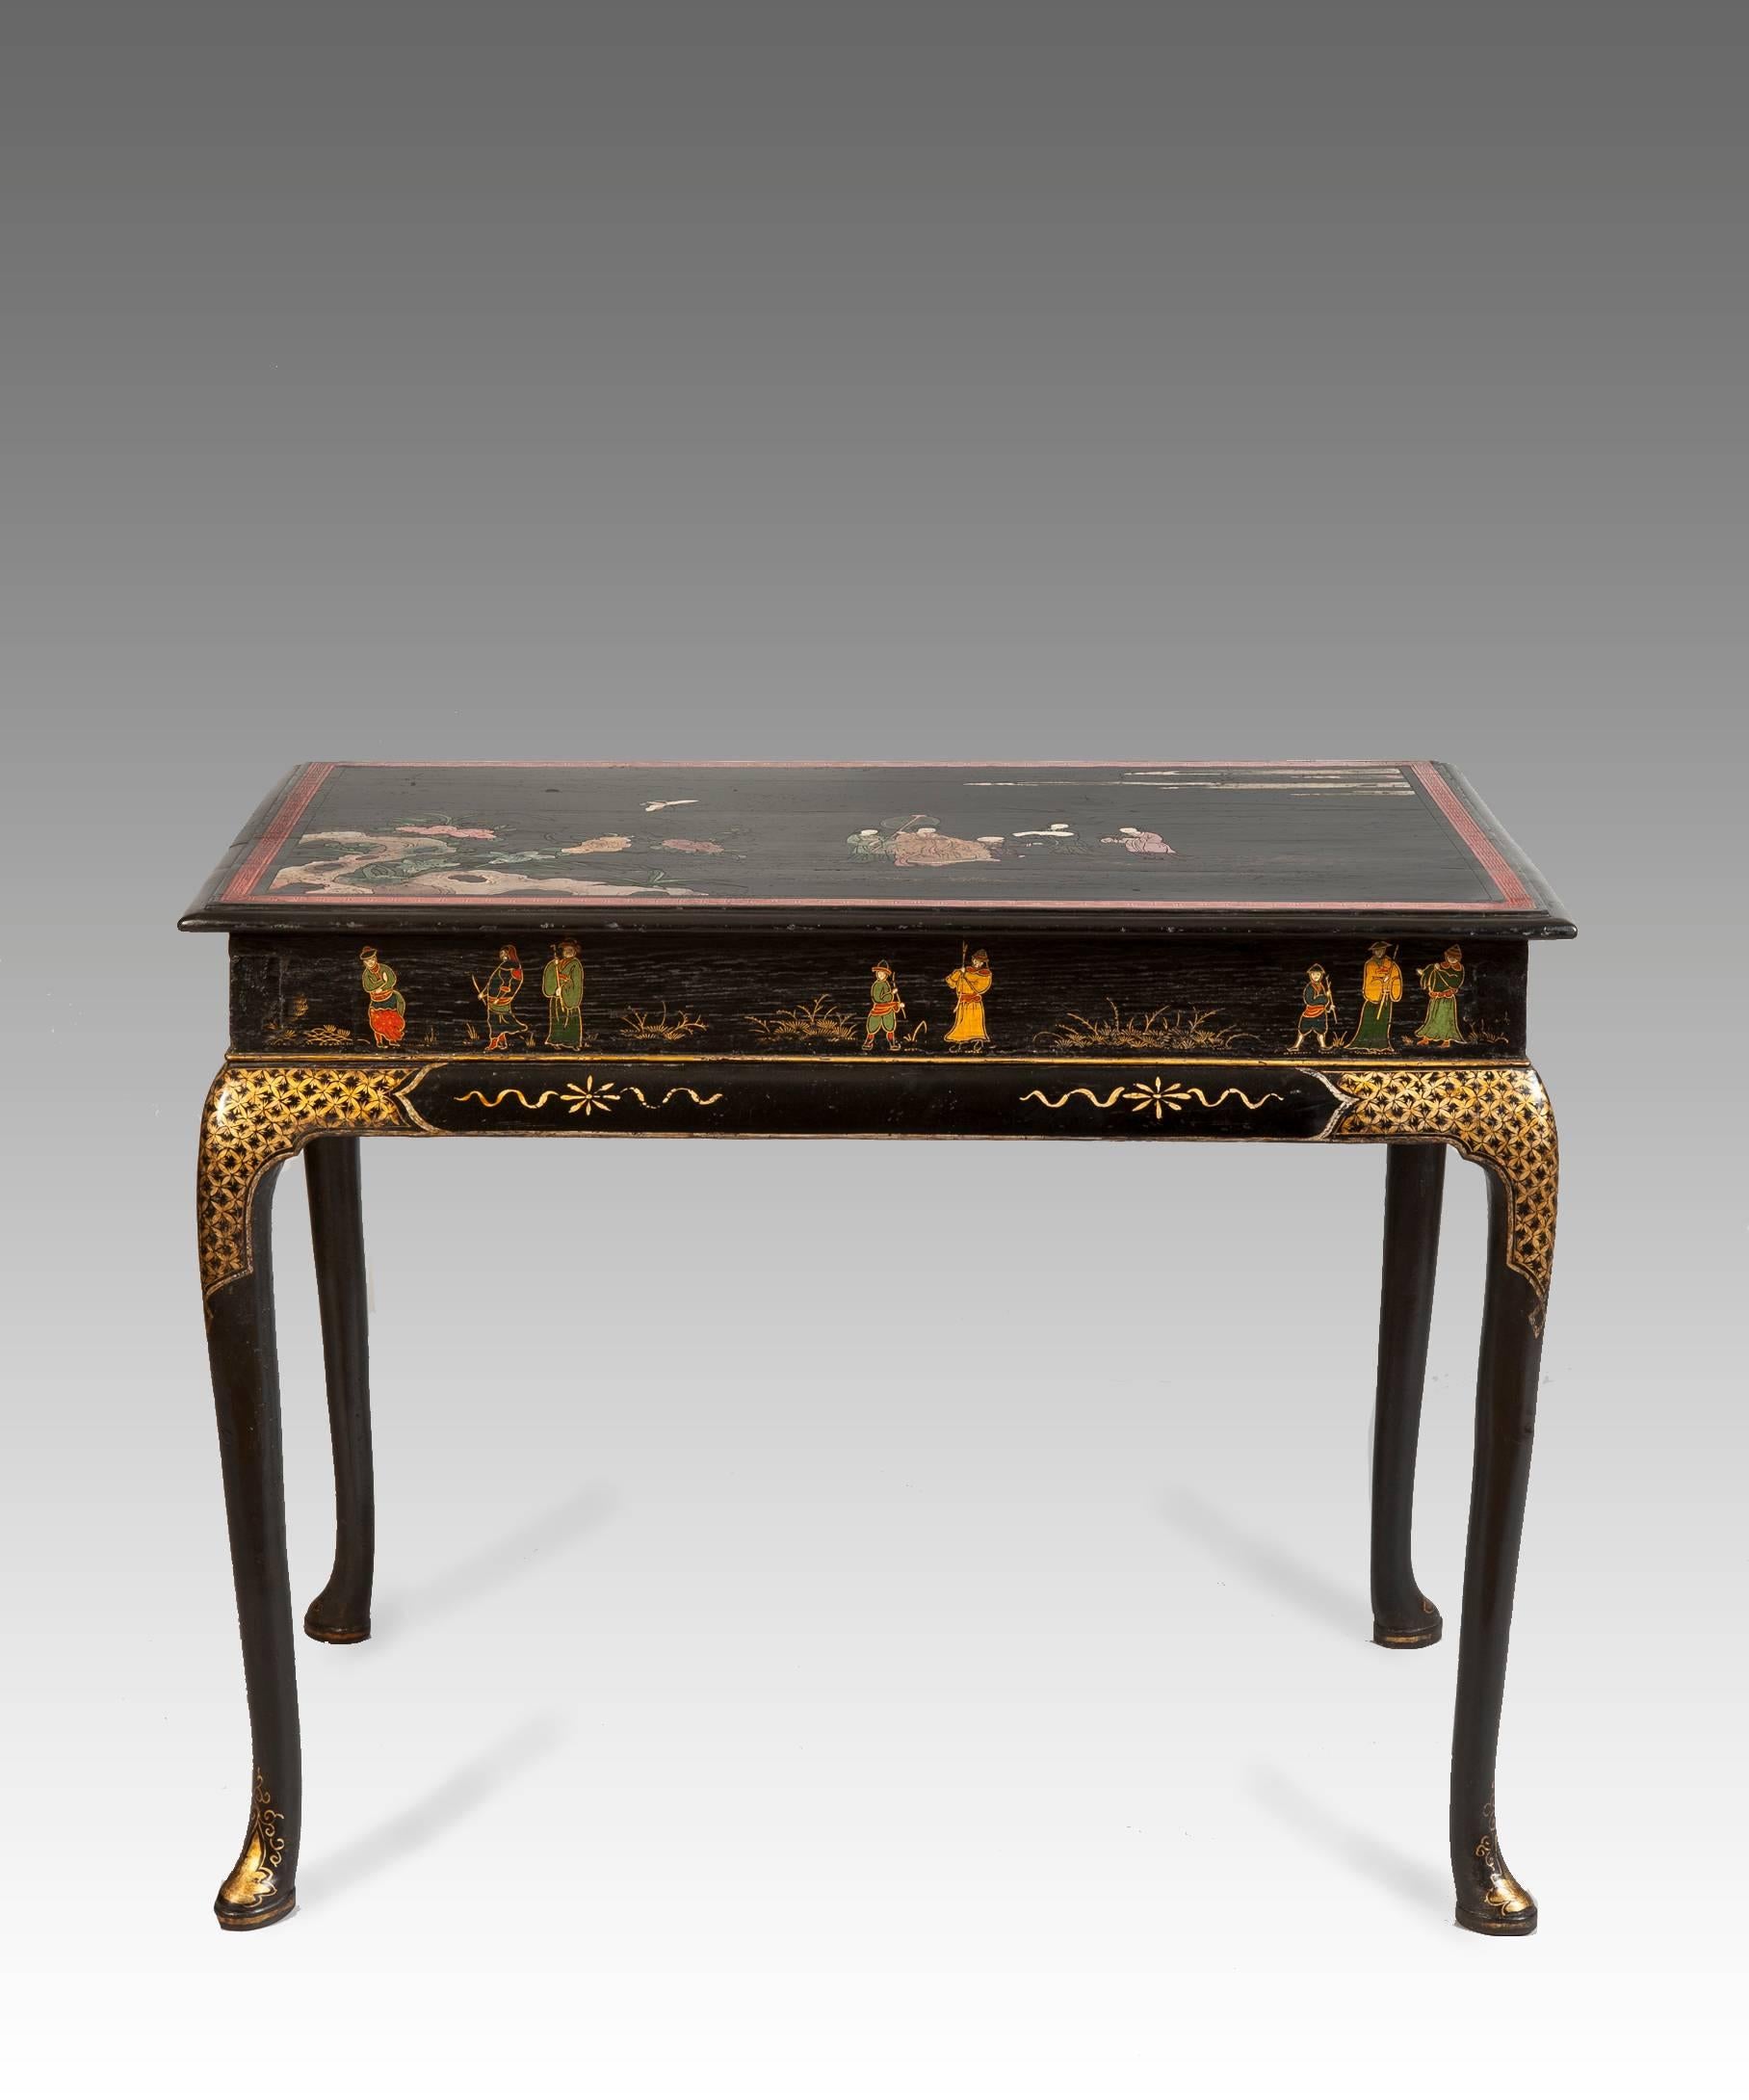 A rare Queen Anne period black lacquer and Japanned centre table; the centre table's top decorated in coromandel lacquer depicting a group of Chinese figures set in a landscape above a frieze decorated with fragments of 17th century Japanese